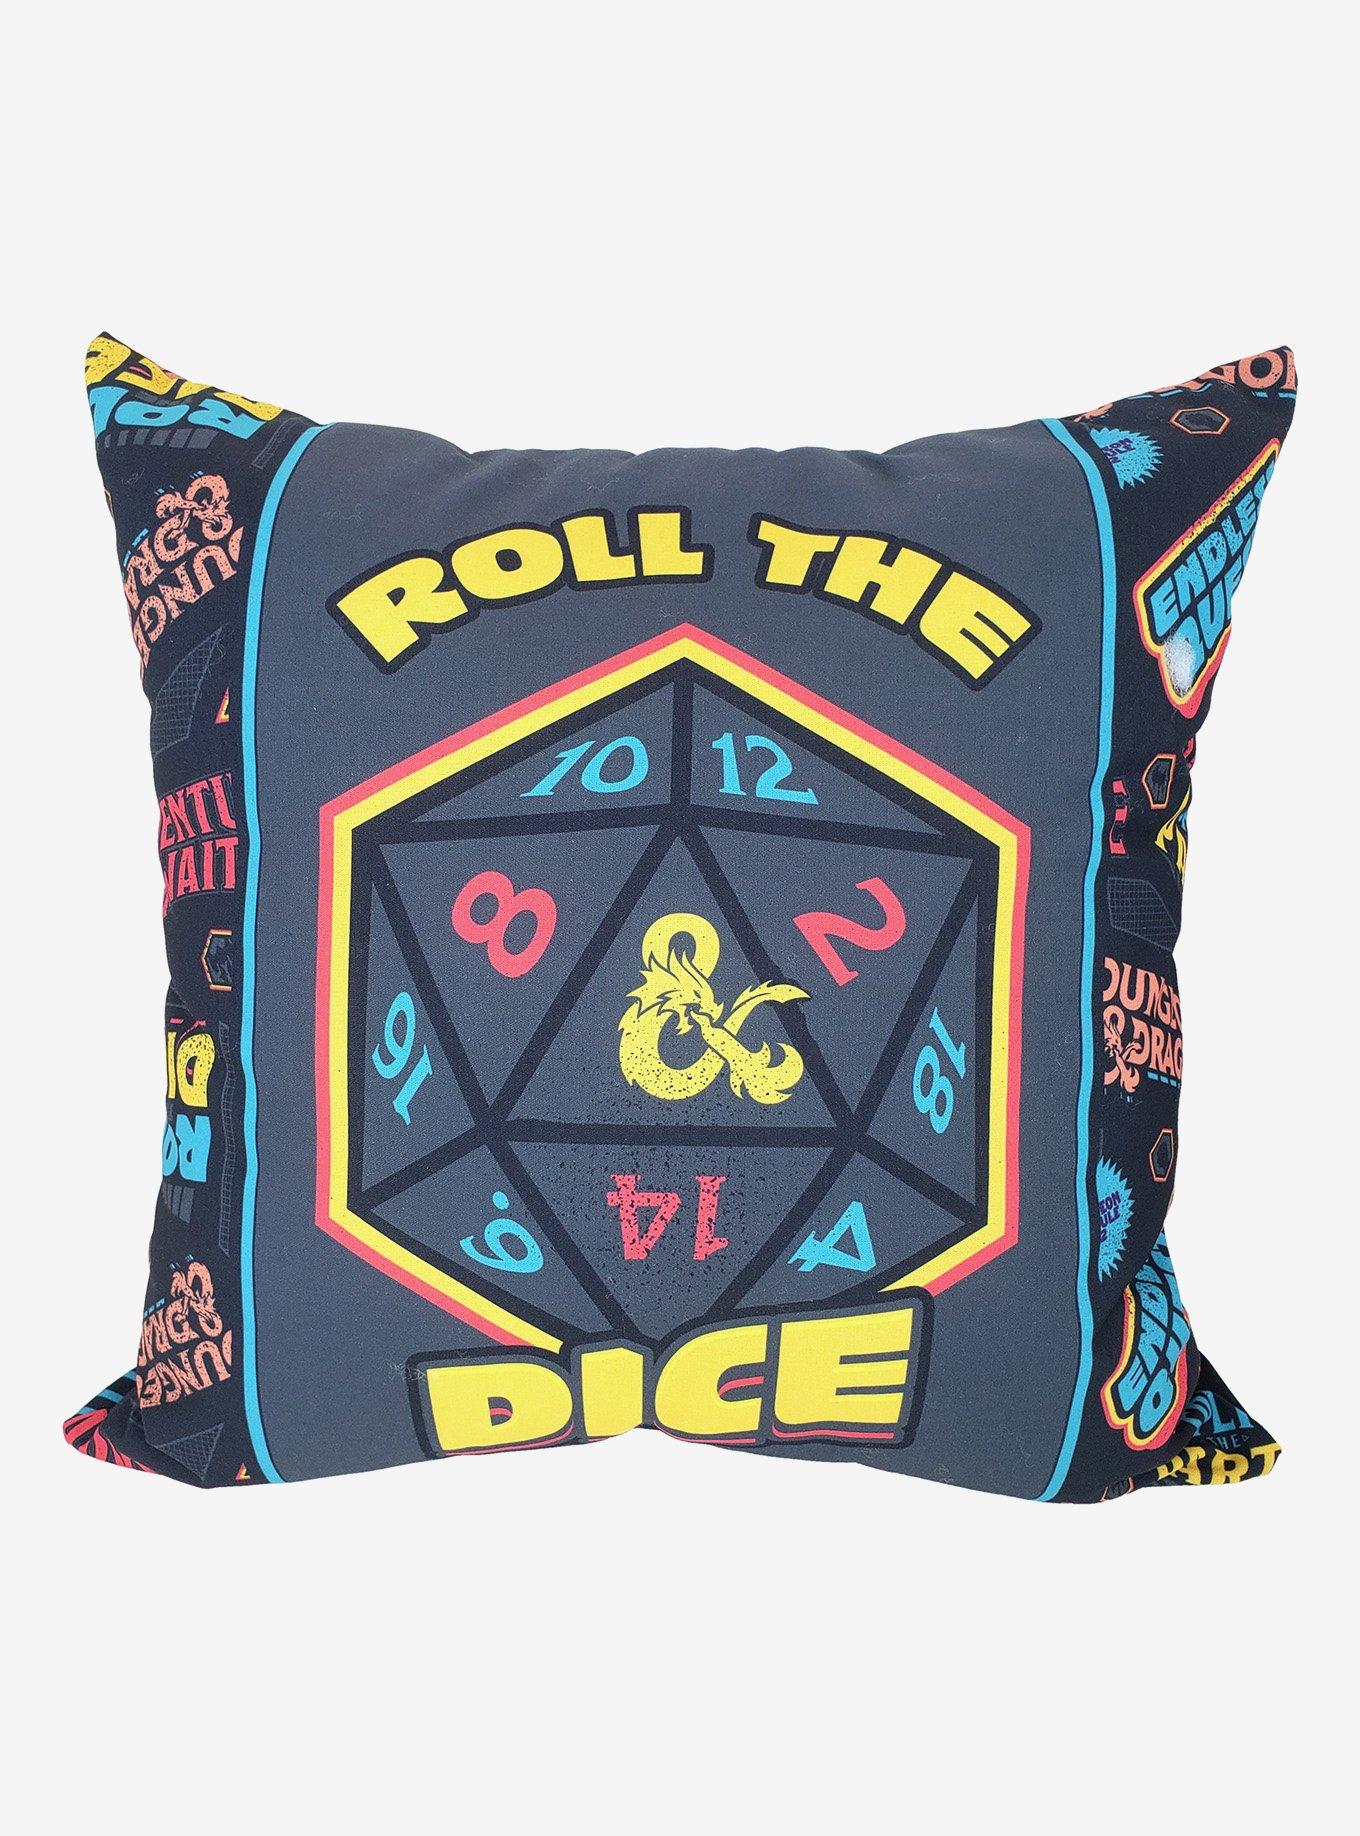 Dungeons & Dragons Roll The Dice Pillow